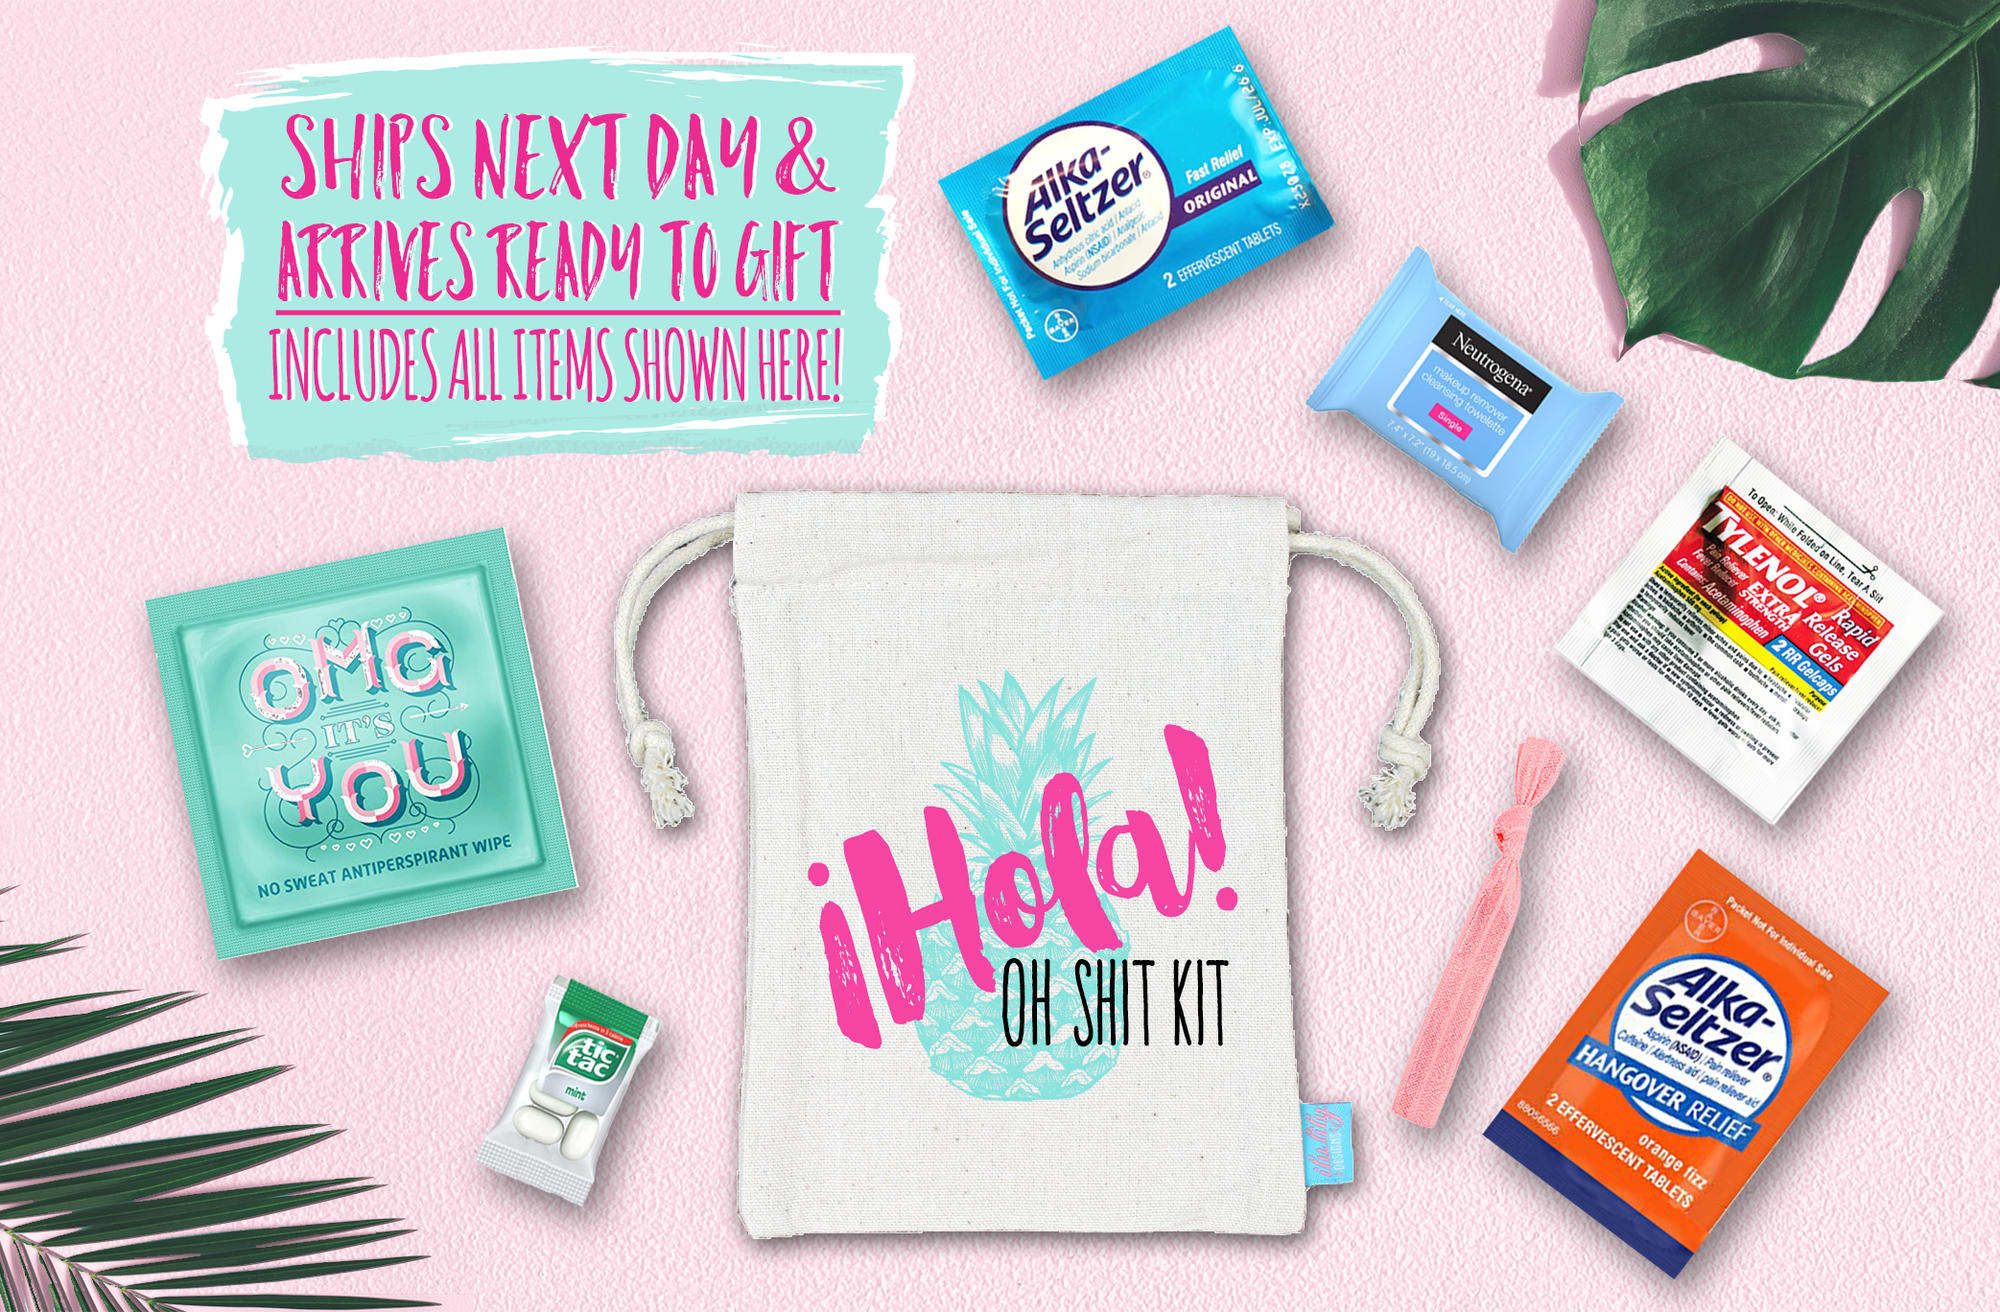 Bachelorette Party Hangover Survival Kit with Supplies |Hola Oh Shit Kit